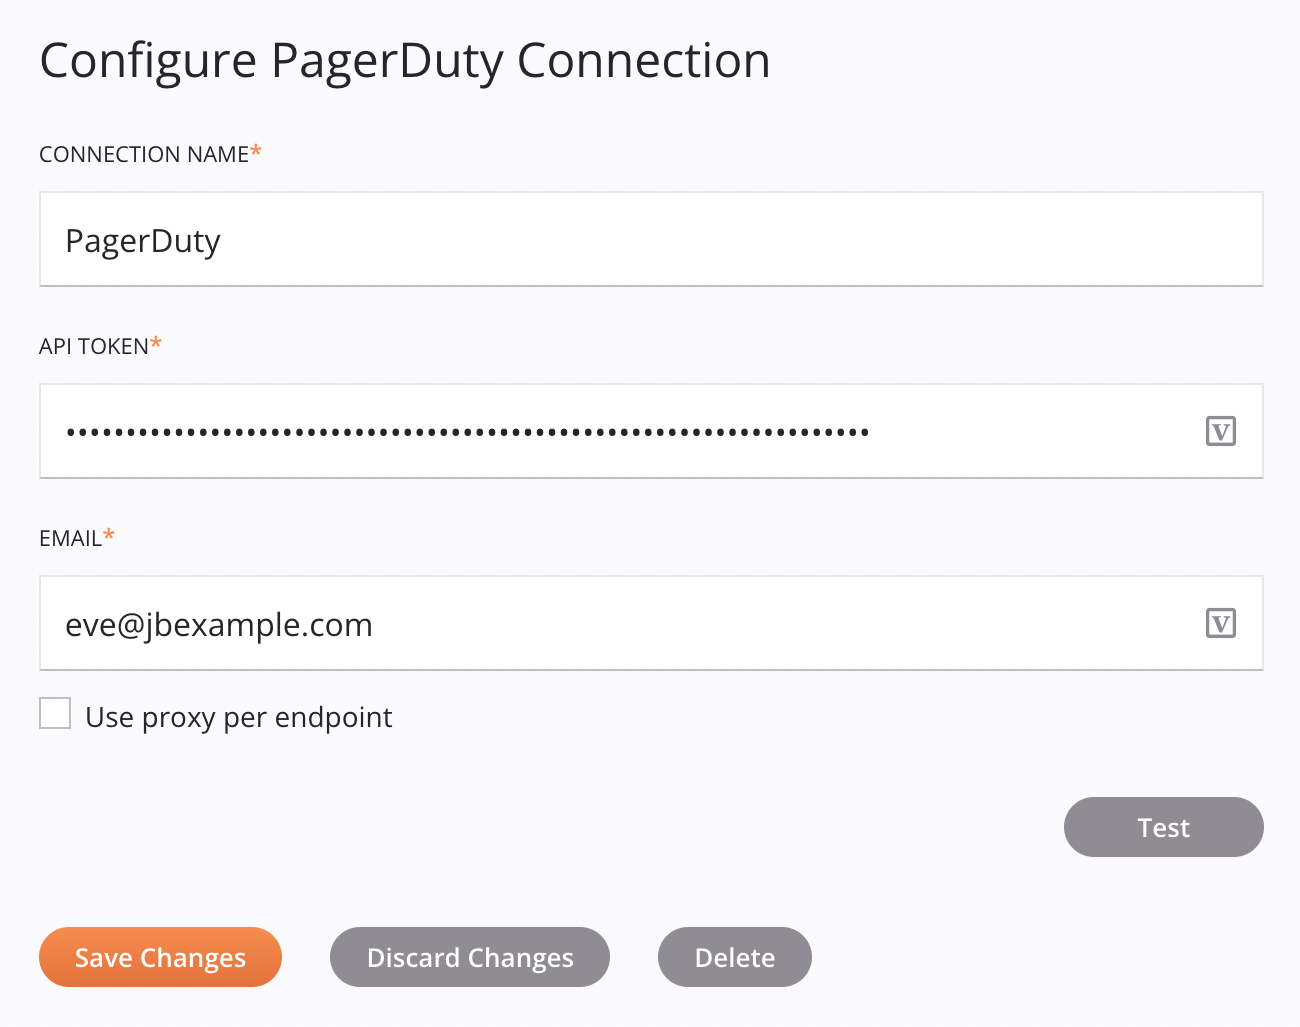 PagerDuty connection configuration